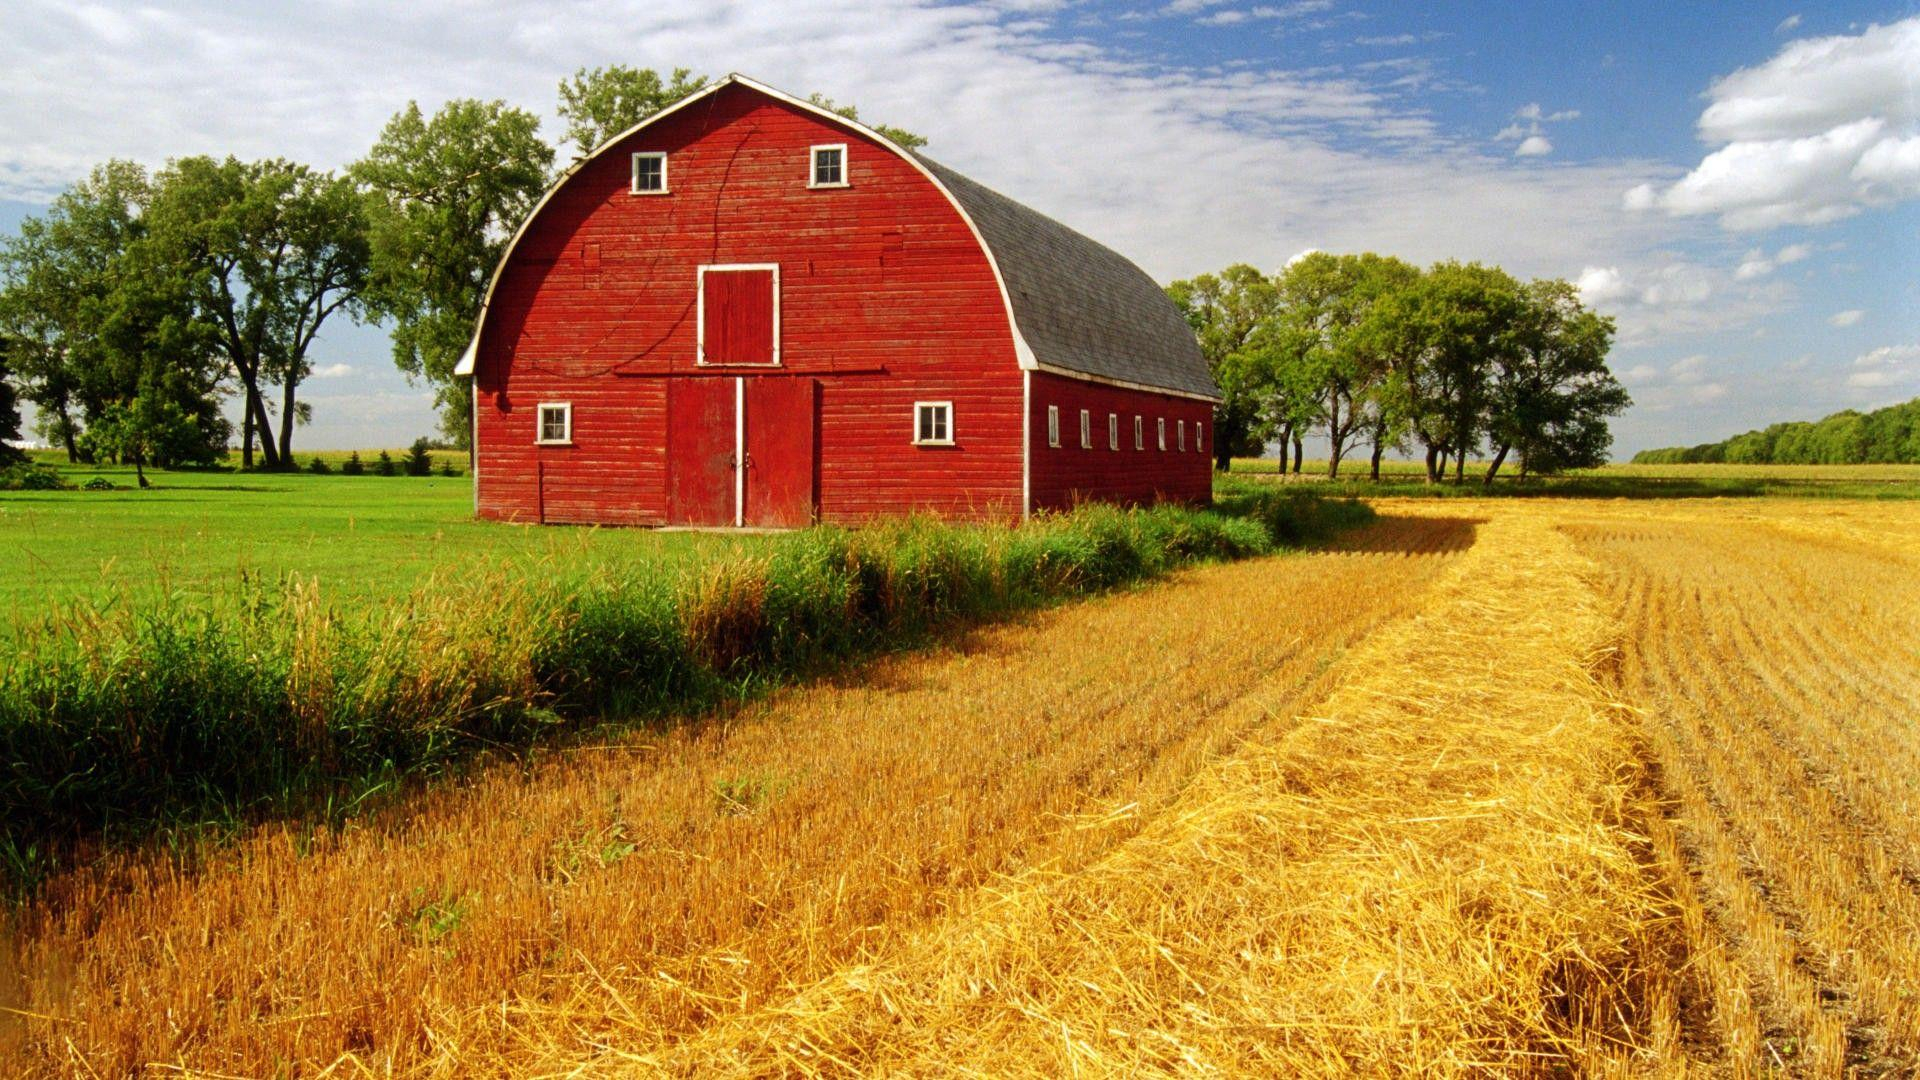 1920x1080 Red Barn Farm Wallpapers